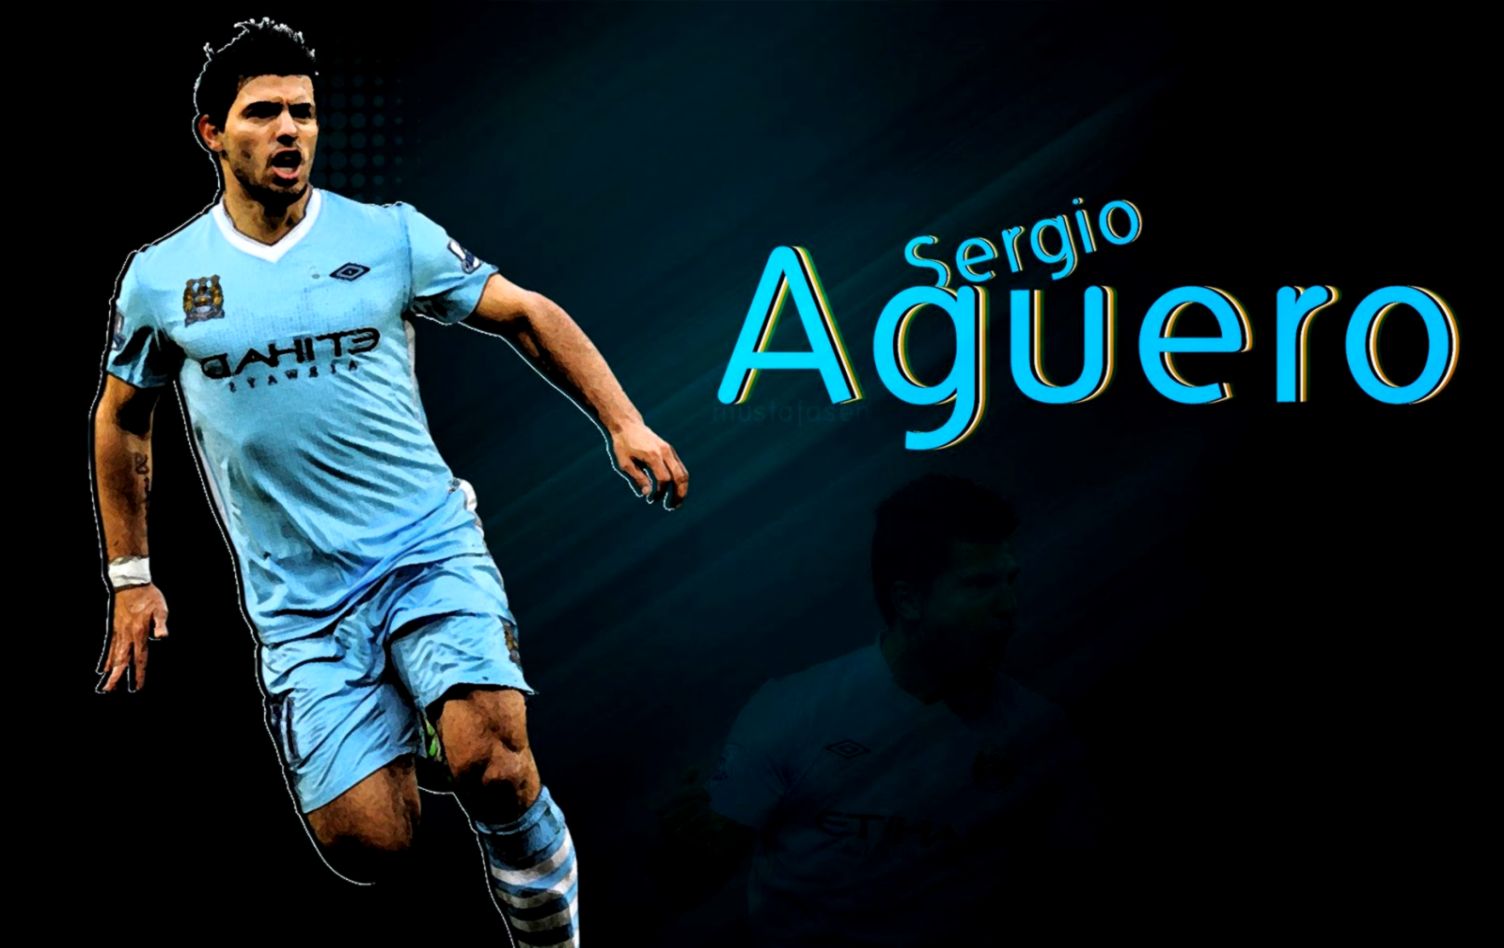 Sergio Aguero Wallpaper Hd Action | This Wallpapers